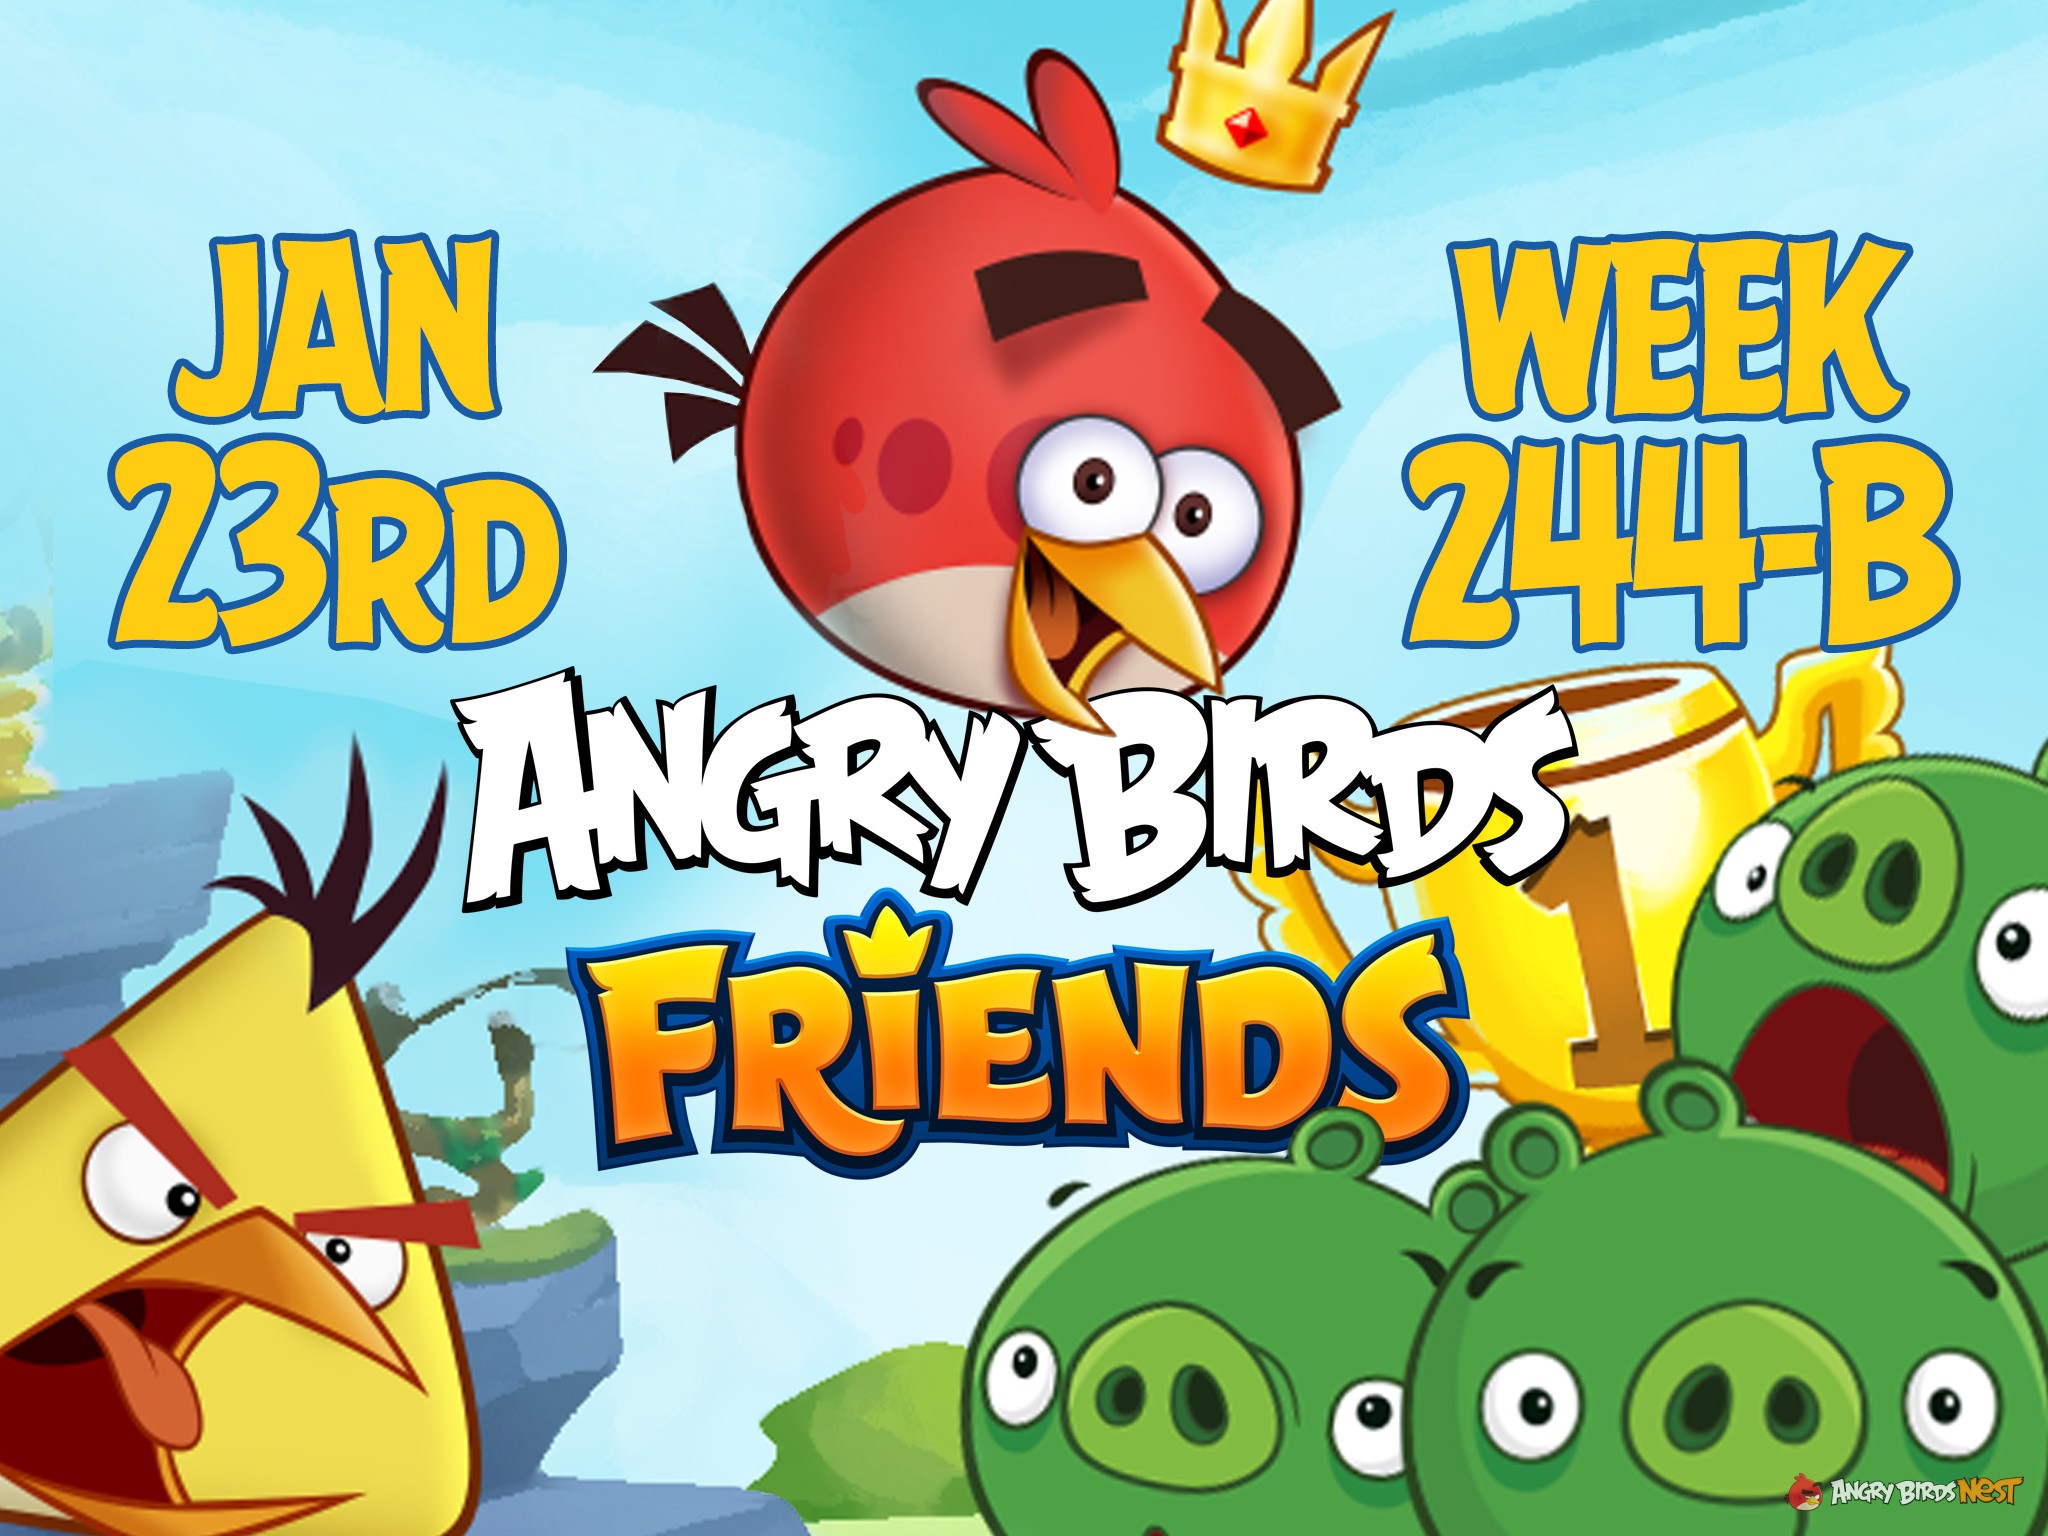 Angry Birds Friends Tournament Week 244-B Feature Image